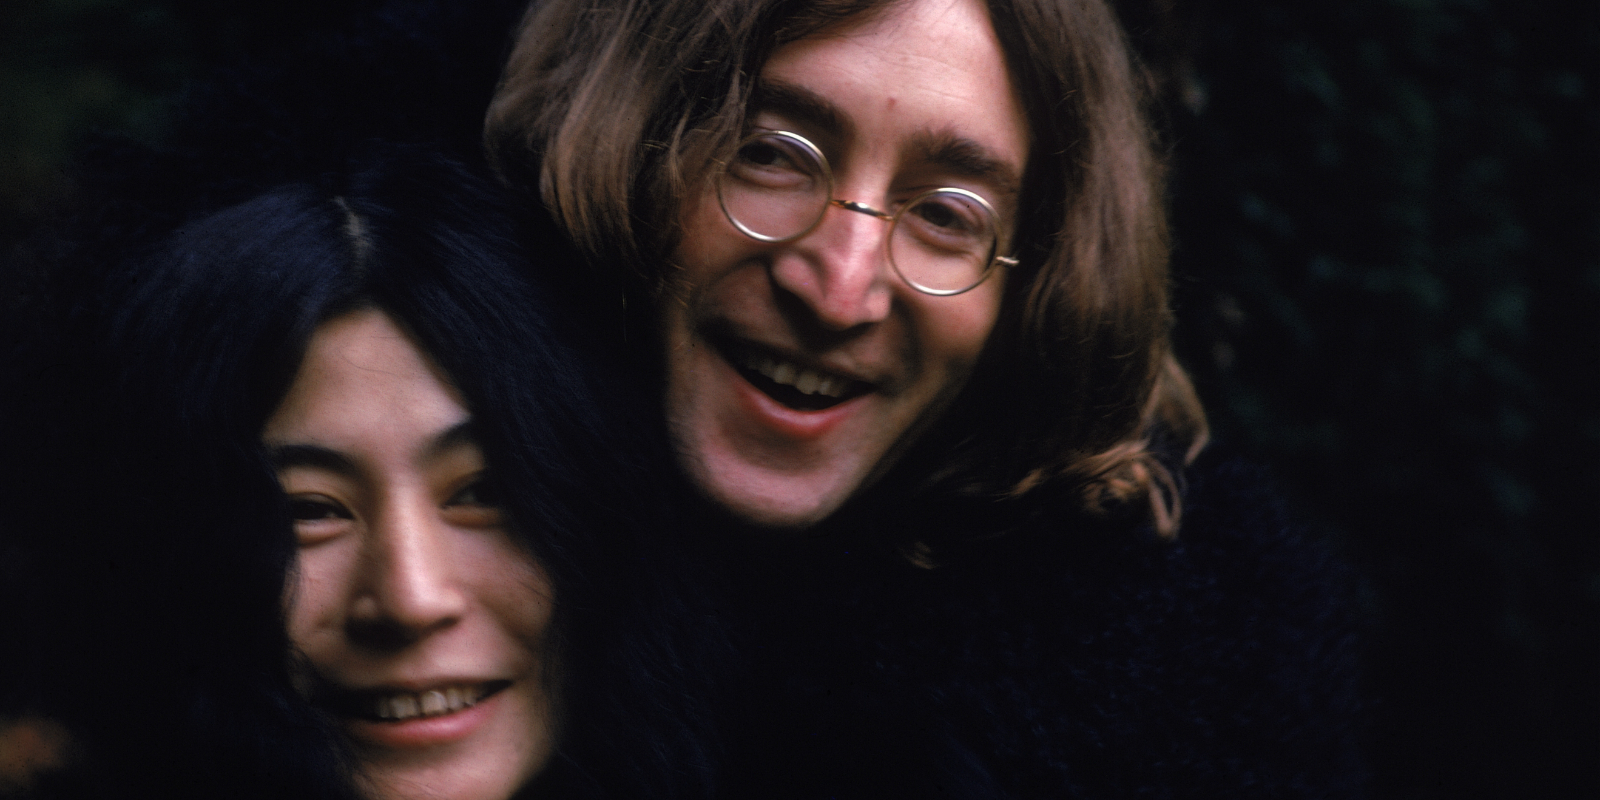 Yoko Ono Once Said She Looked for Something 'Tender and Weak' in Men ...